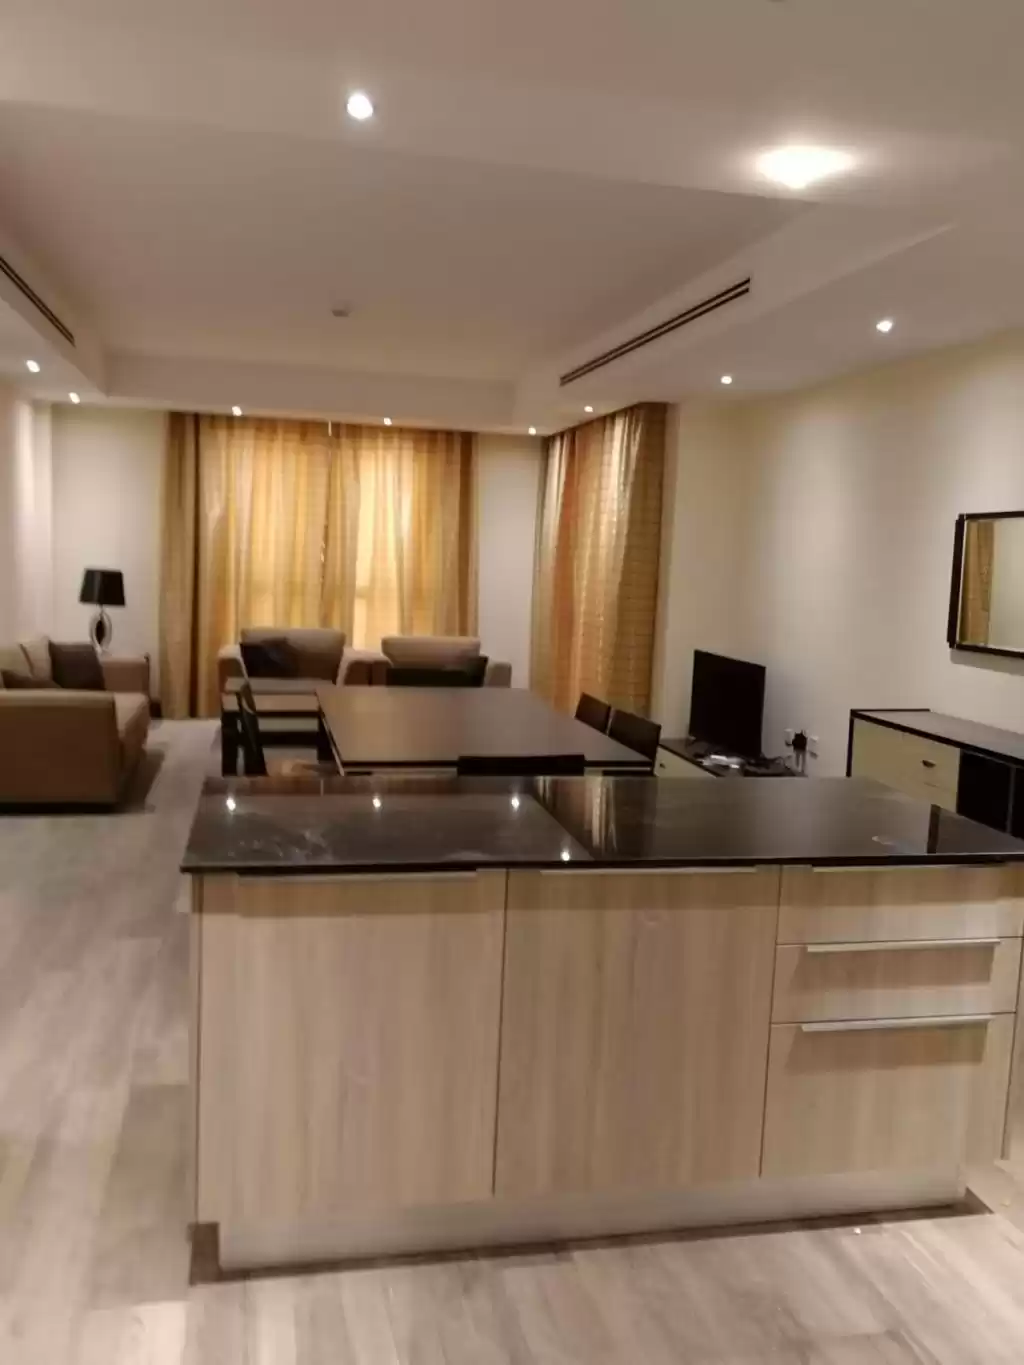 Residential Ready Property 1 Bedroom F/F Apartment  for rent in Al Sadd , Doha #16469 - 1  image 